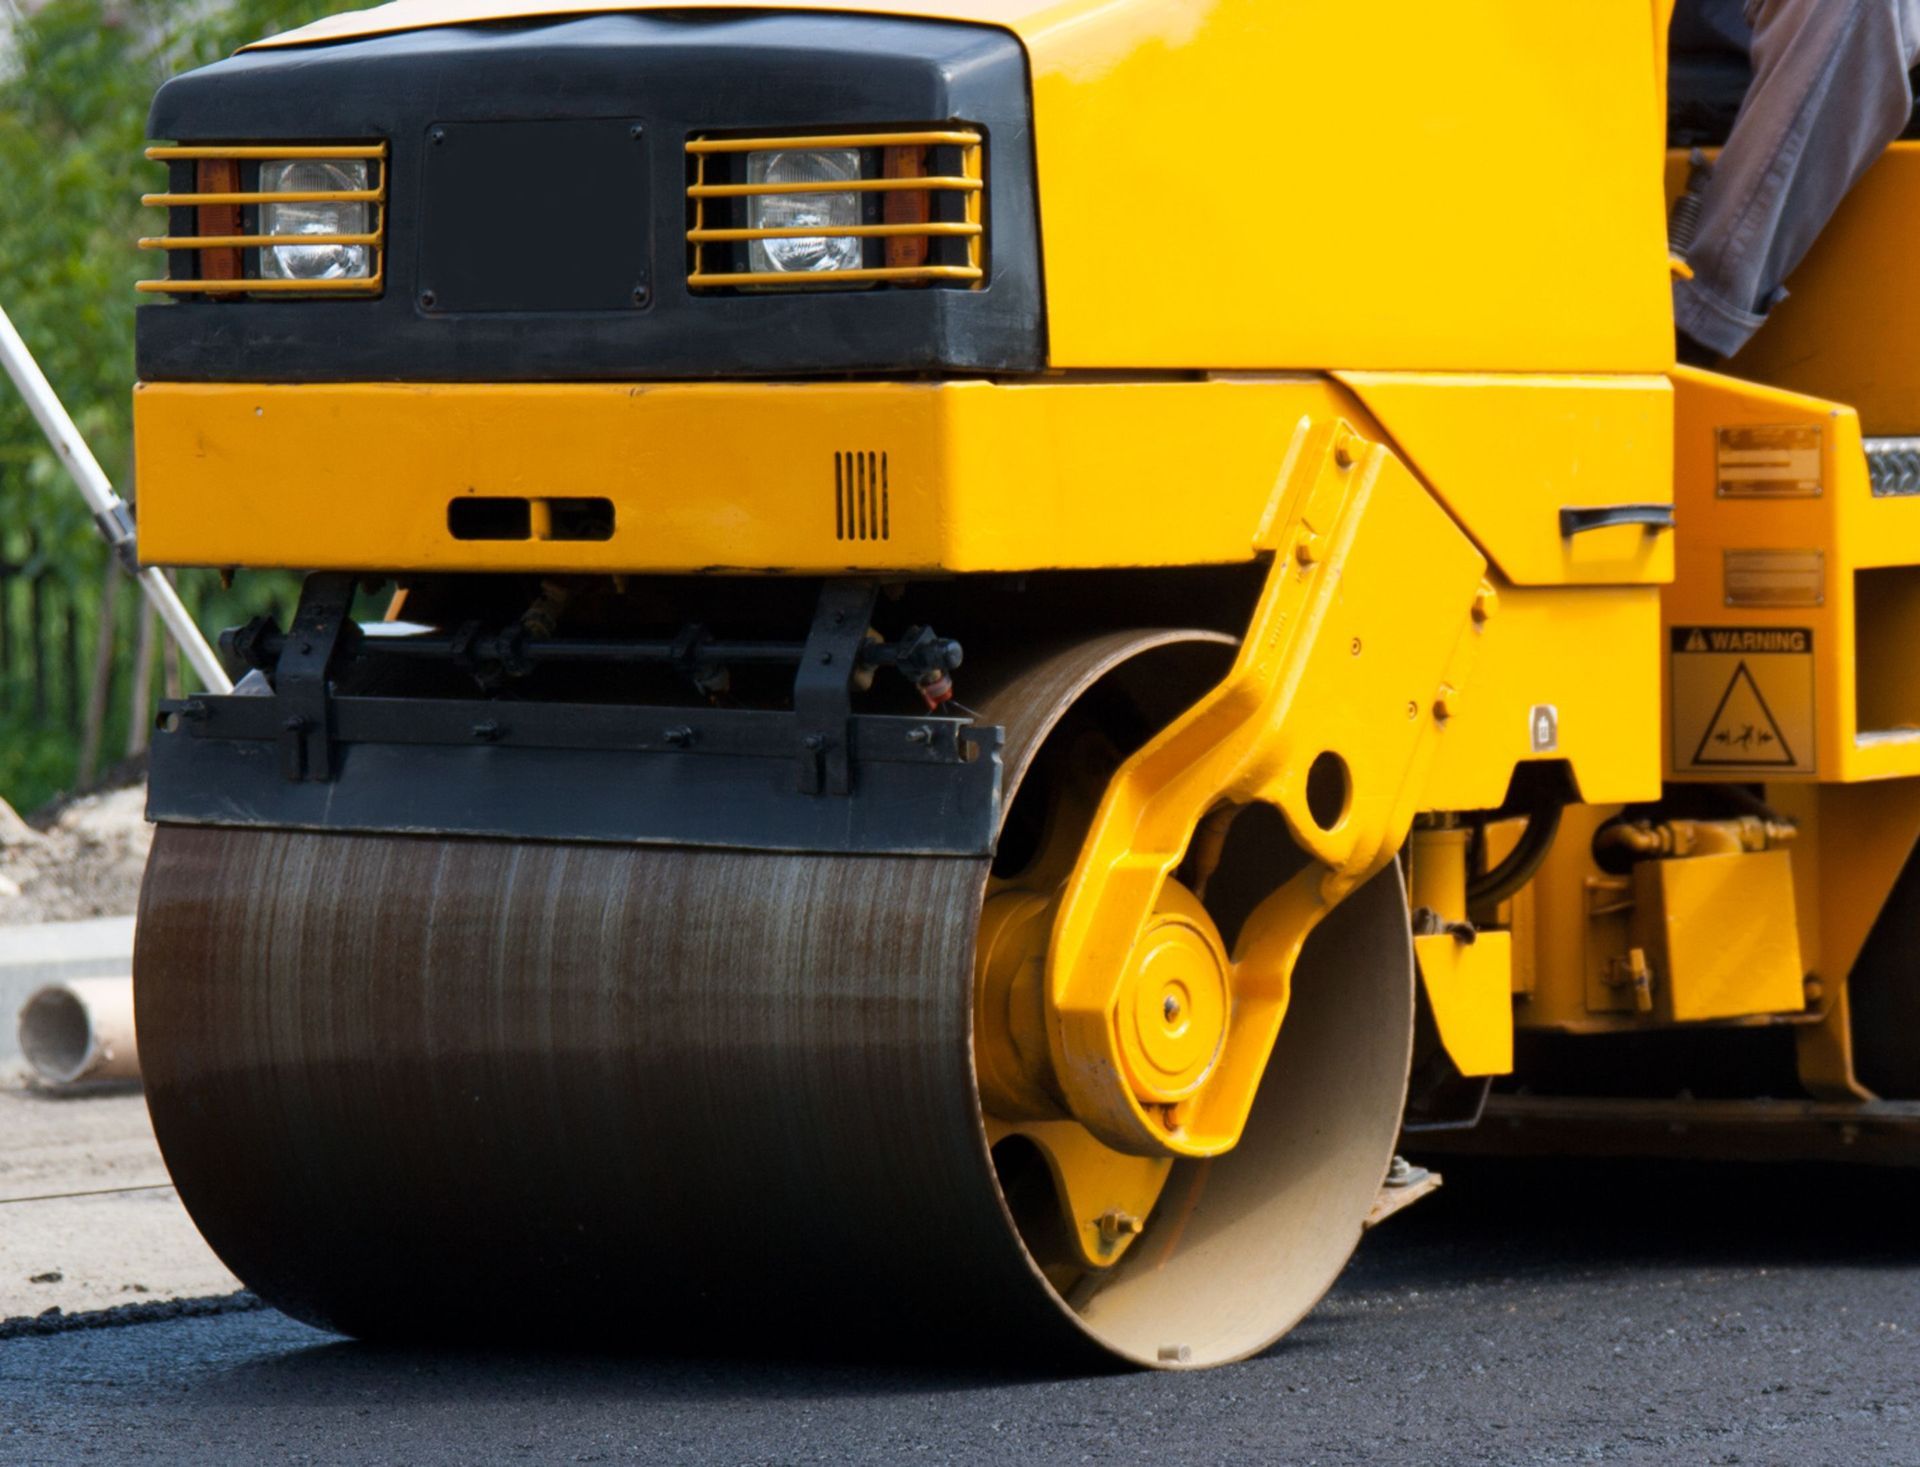 An expert in asphalt paving performing professional and quality services